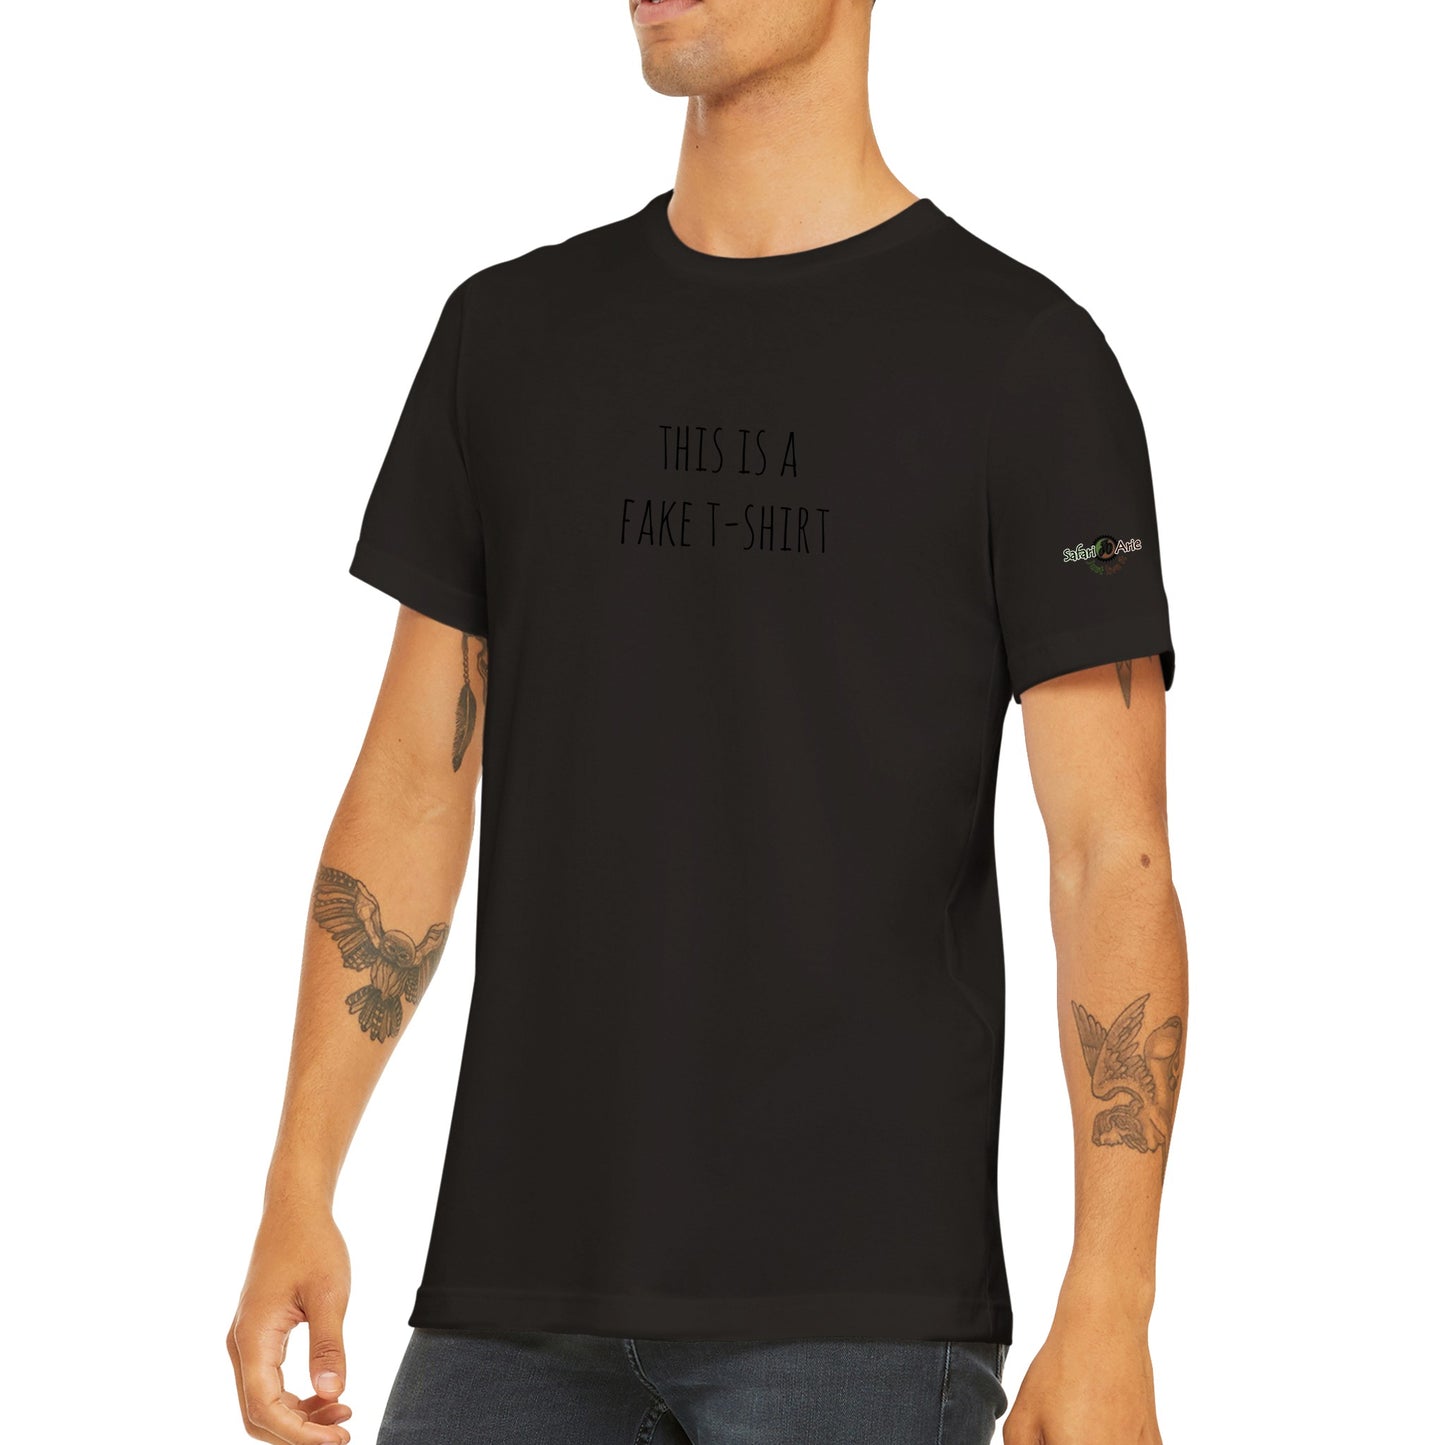 This is a fake t-shirt - unisex